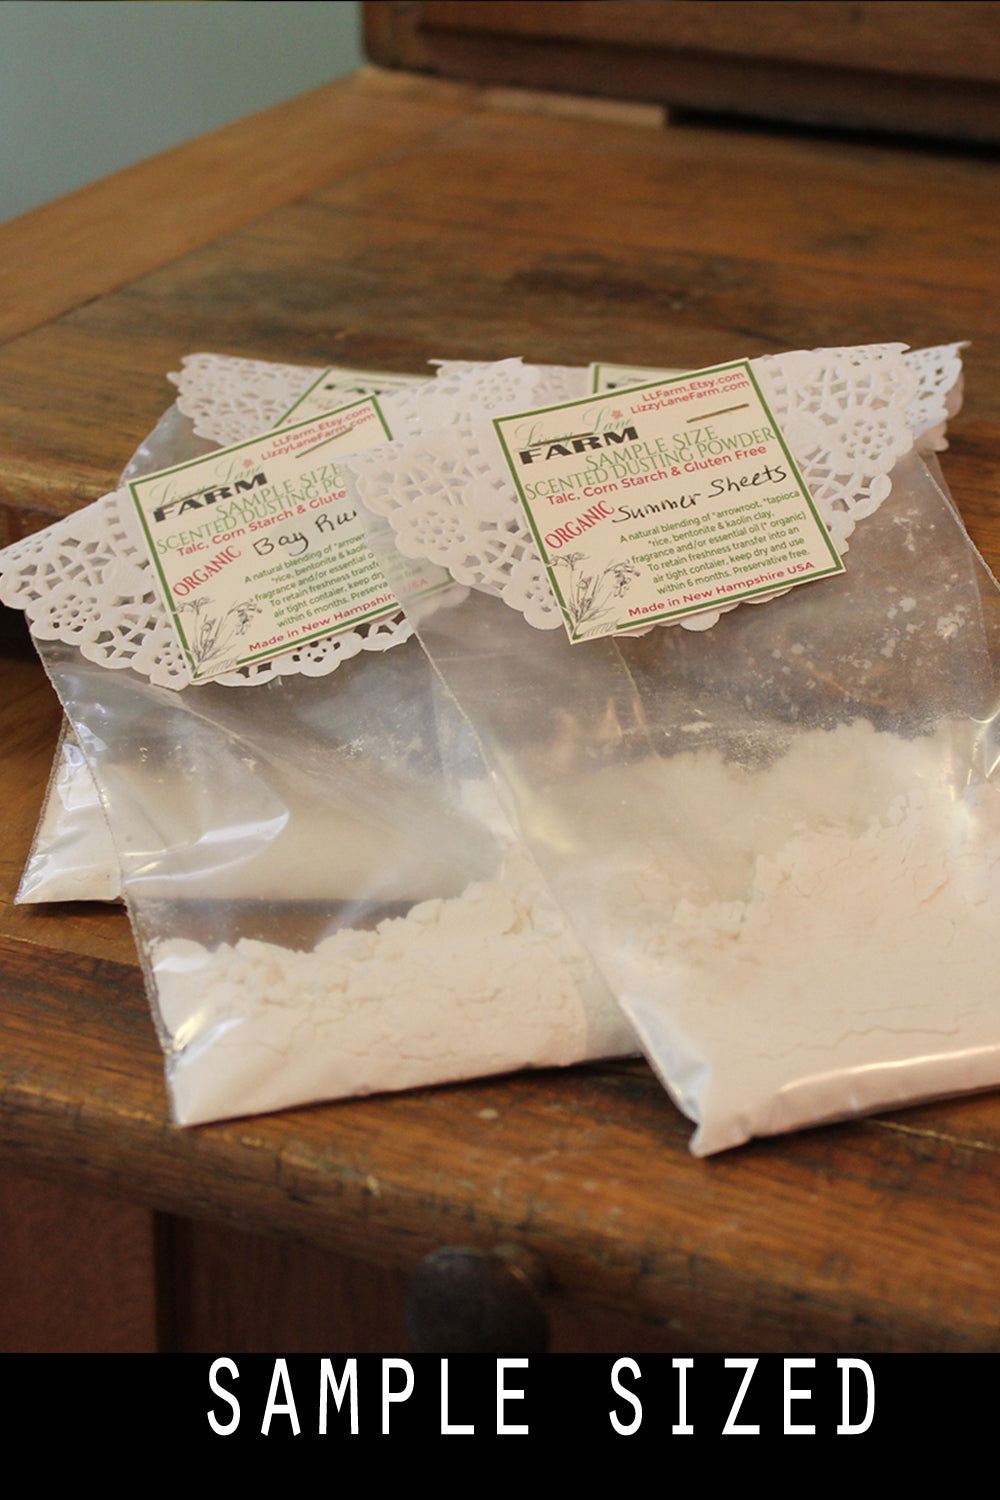 Organic Dusting Body Powder Sample Trial Size :  PICK • YOUR • SCENT - Lizzy Lane Farm Apothecary